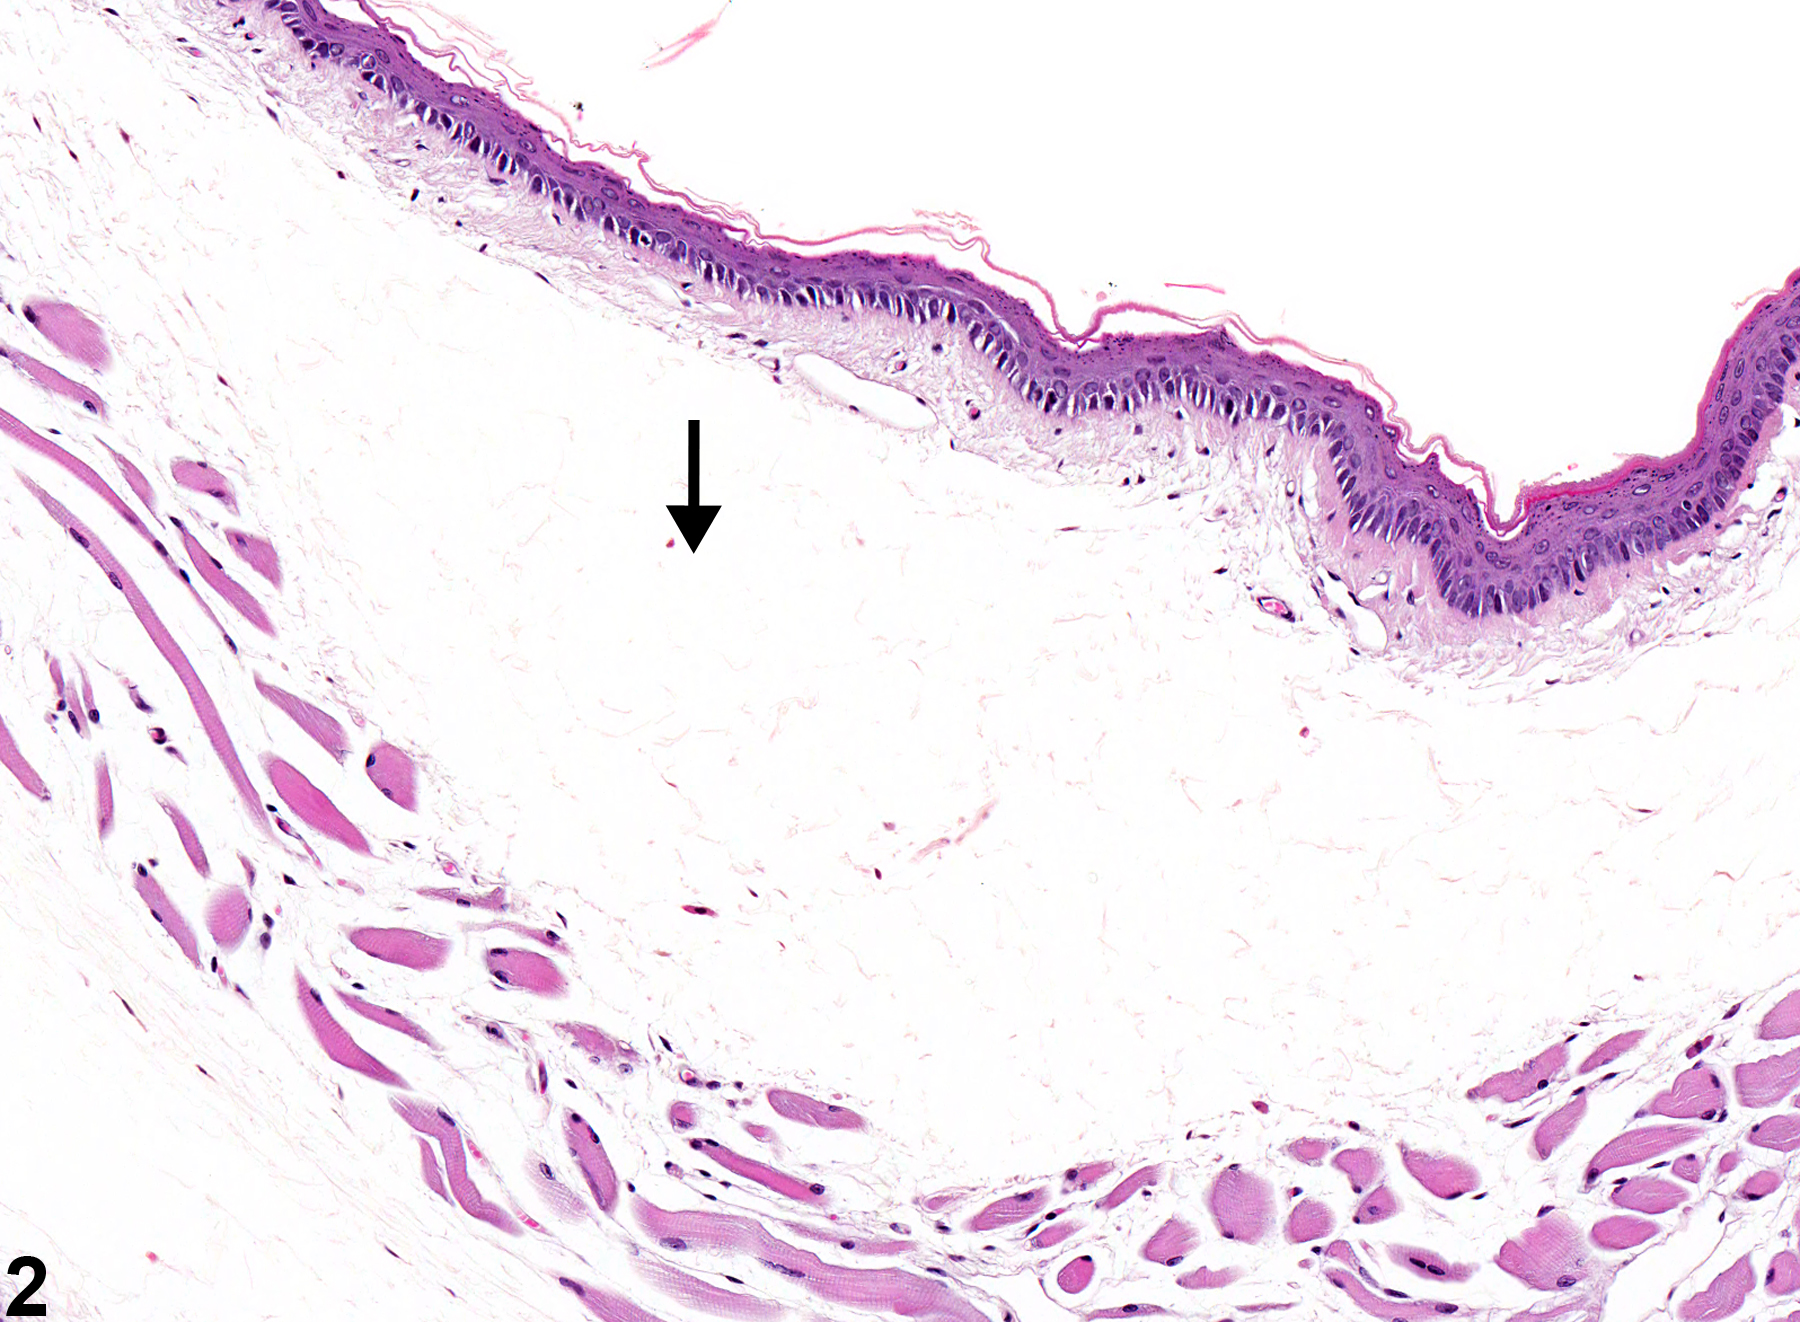 Image of edema in the esophagus from a male B6C3F1 mouse in a chronic study